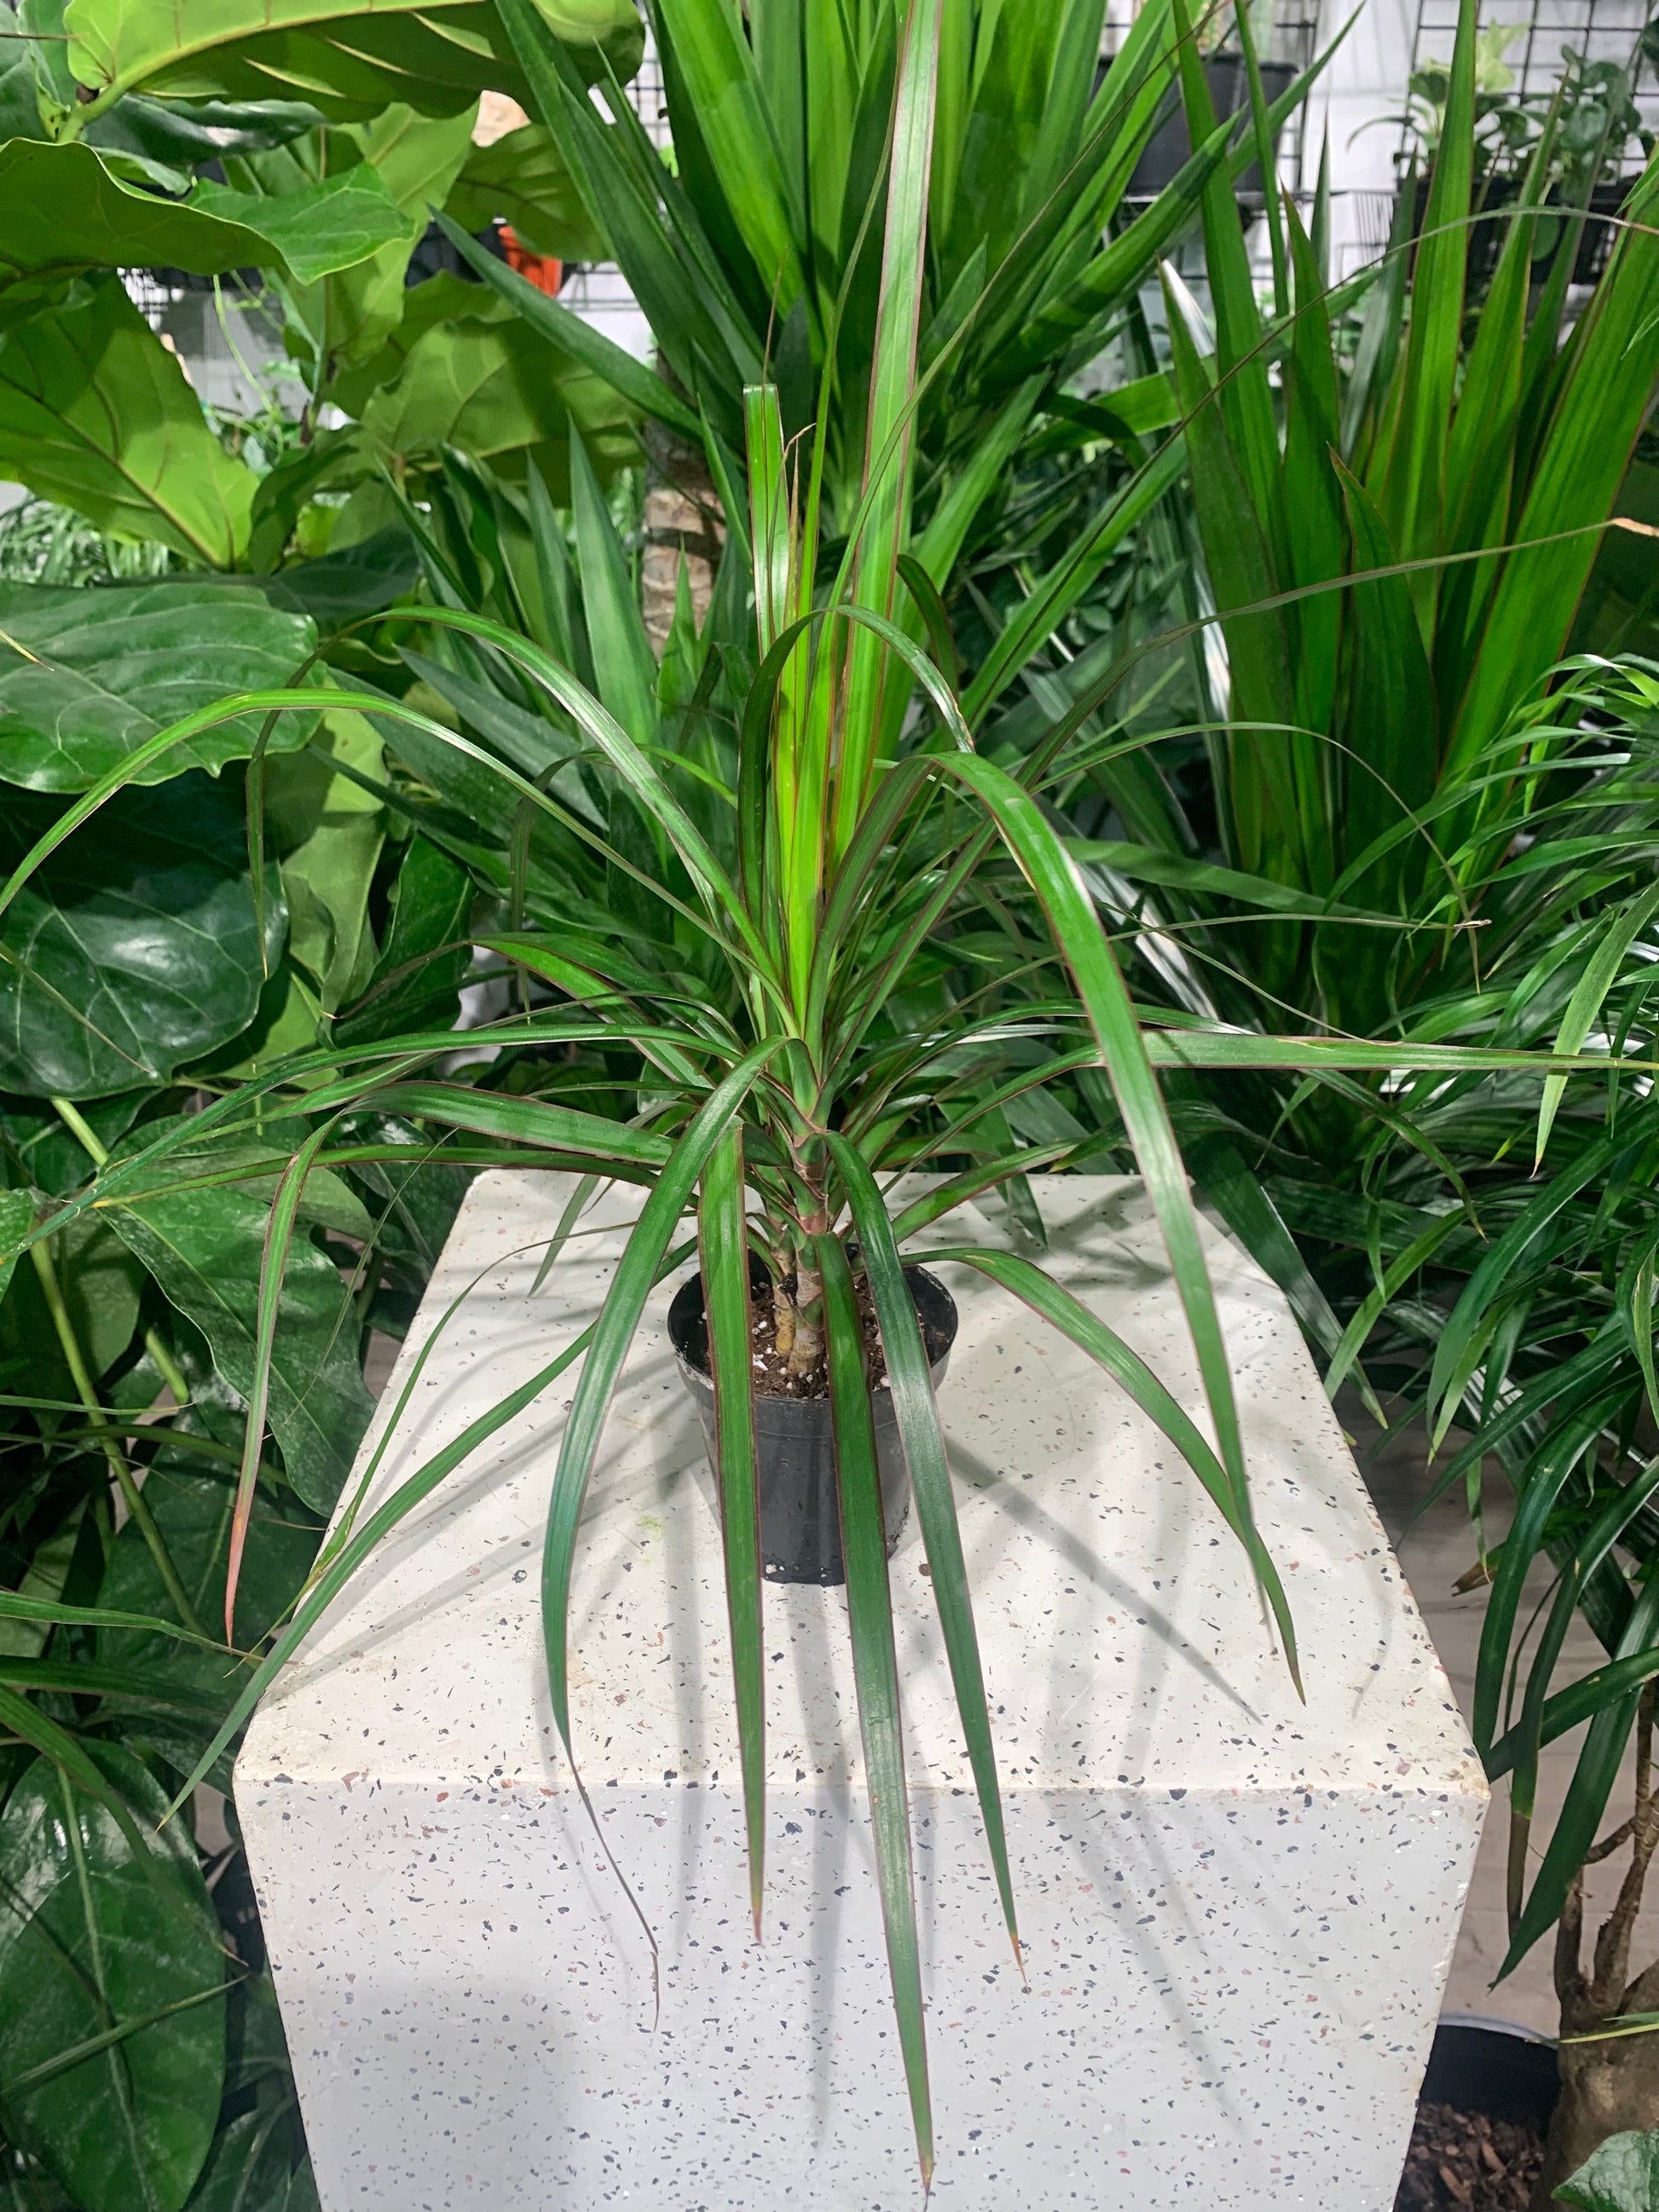 Aboera, Dracaena (Dracaena marginata) in a 4 inch pot. Indoor plant for sale by Promise Supply for delivery and pickup in Toronto